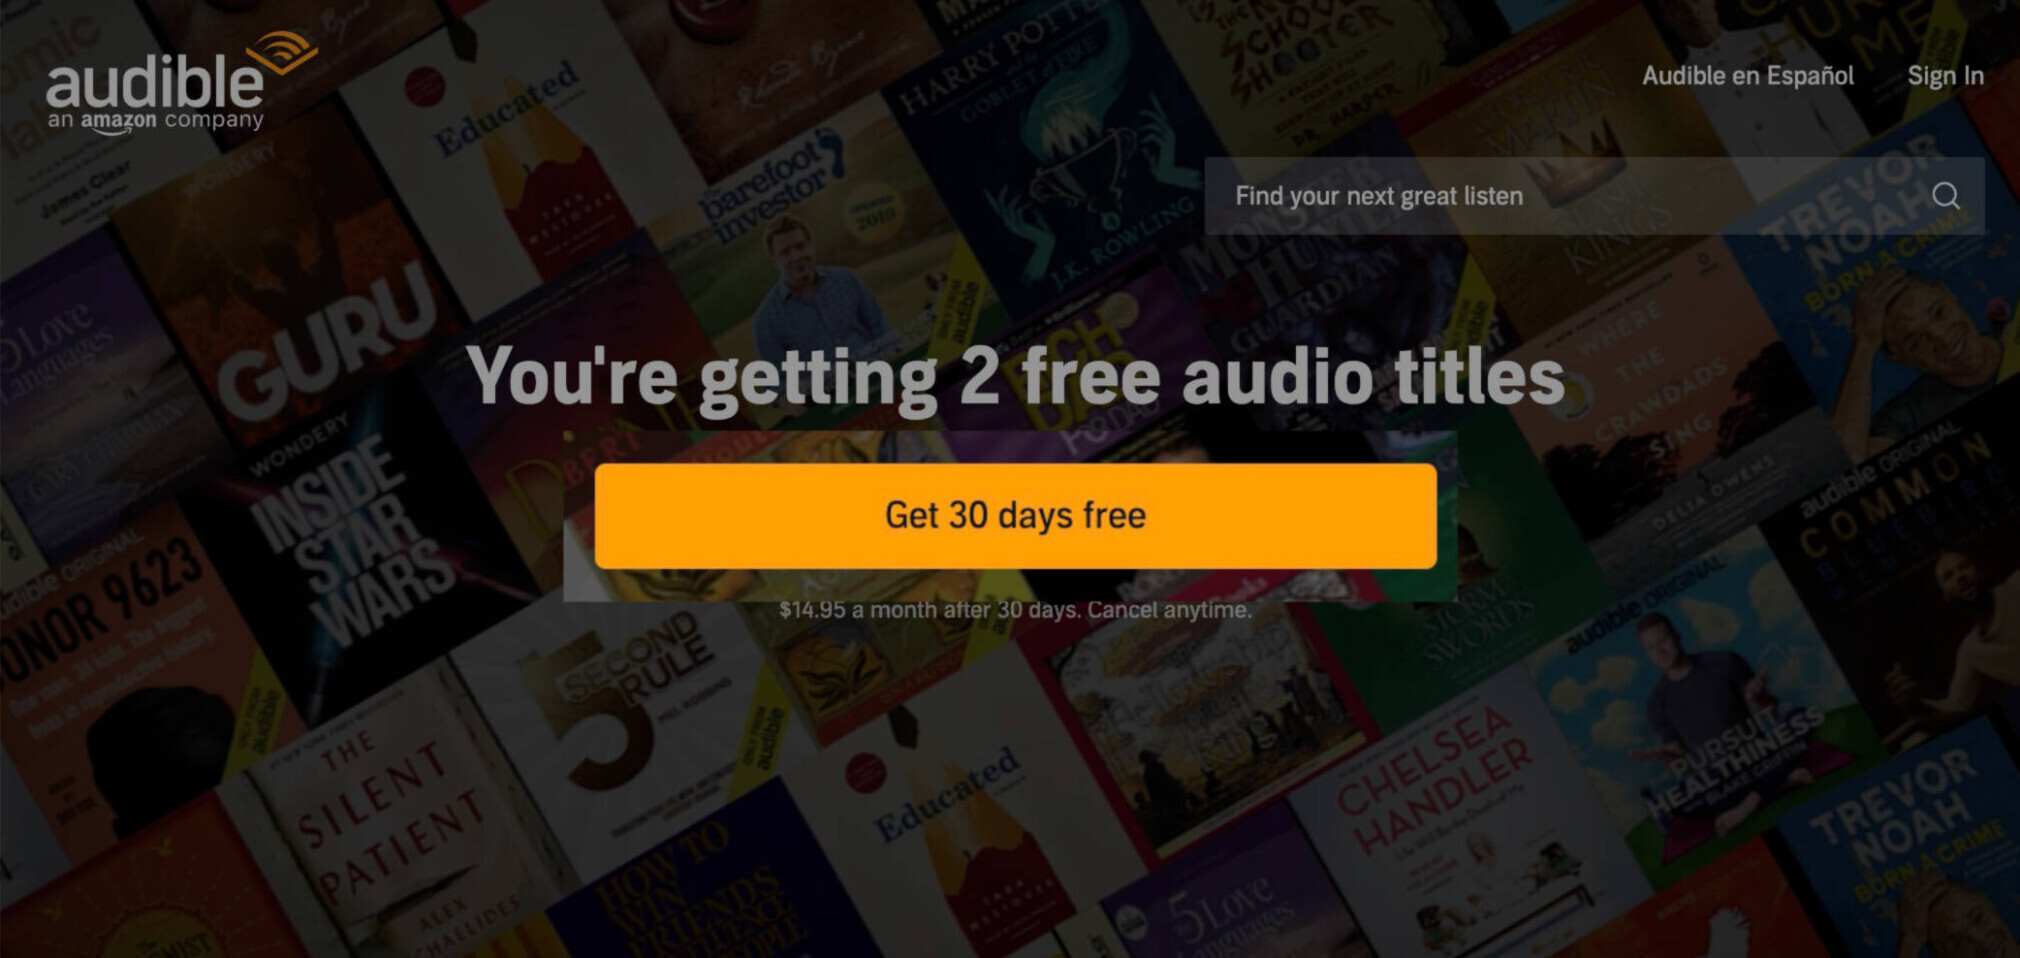 Audible's landing page with the "Get 30 days free" button highlighted